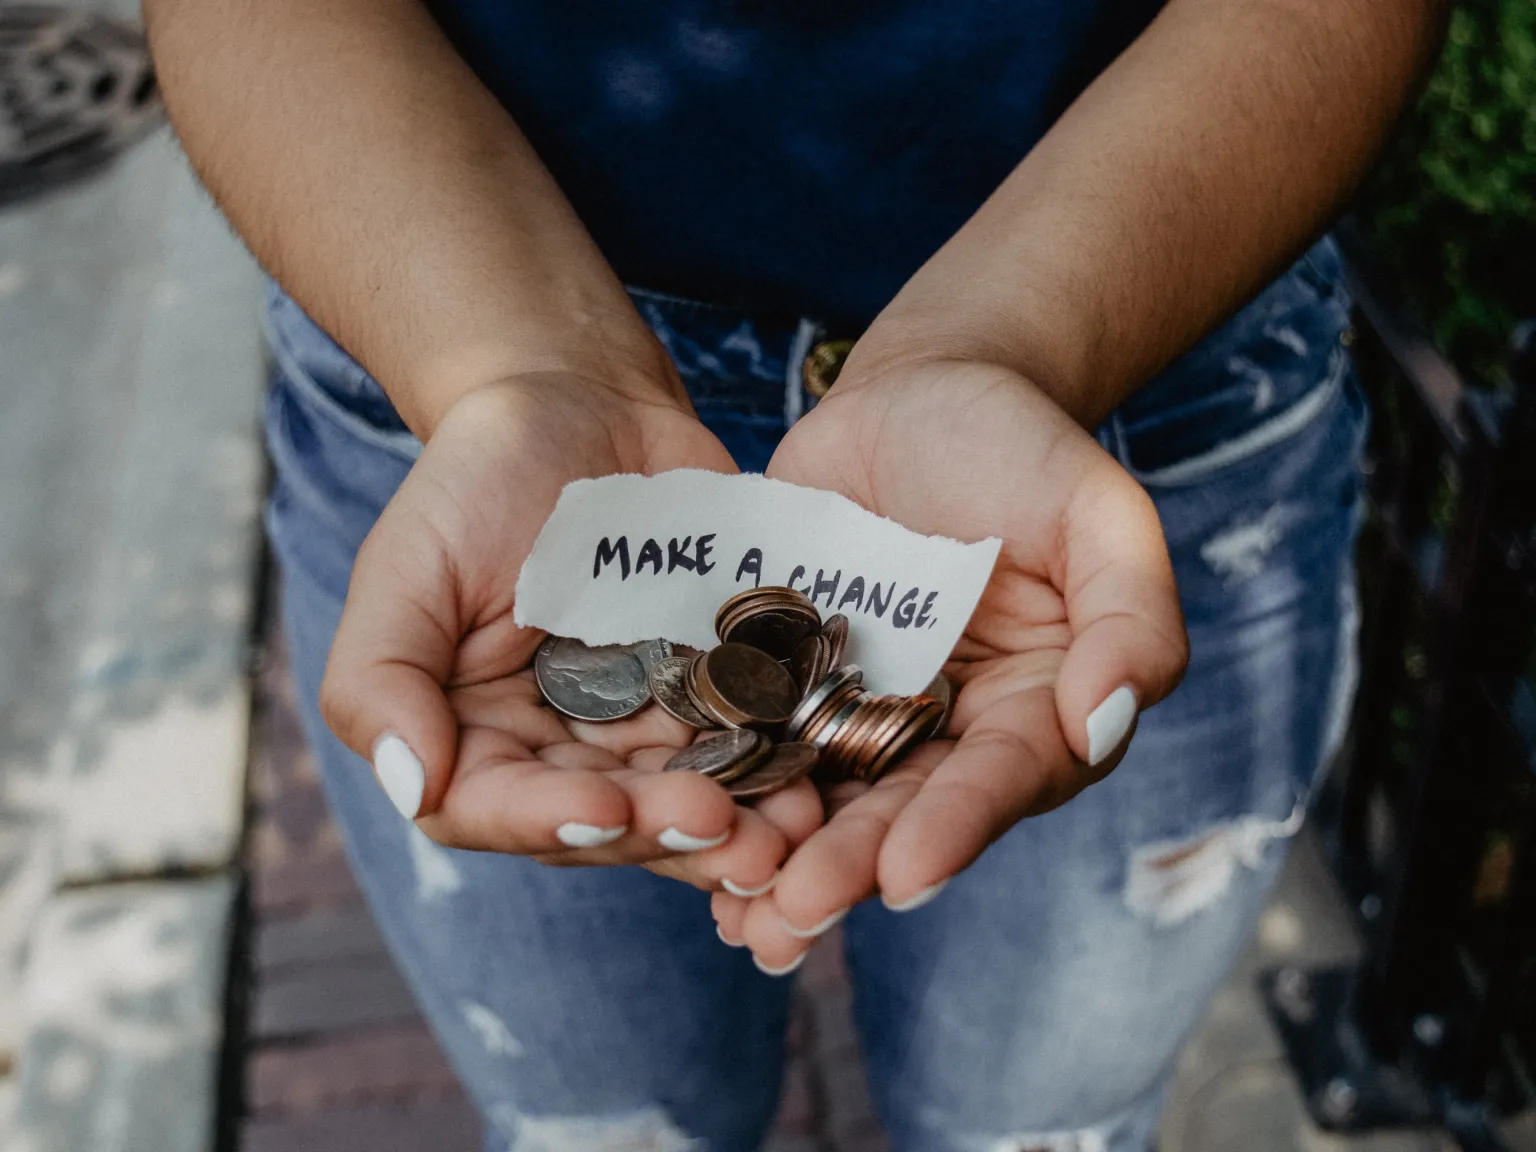 Hands held forward with change and a small written note that says "make a change"